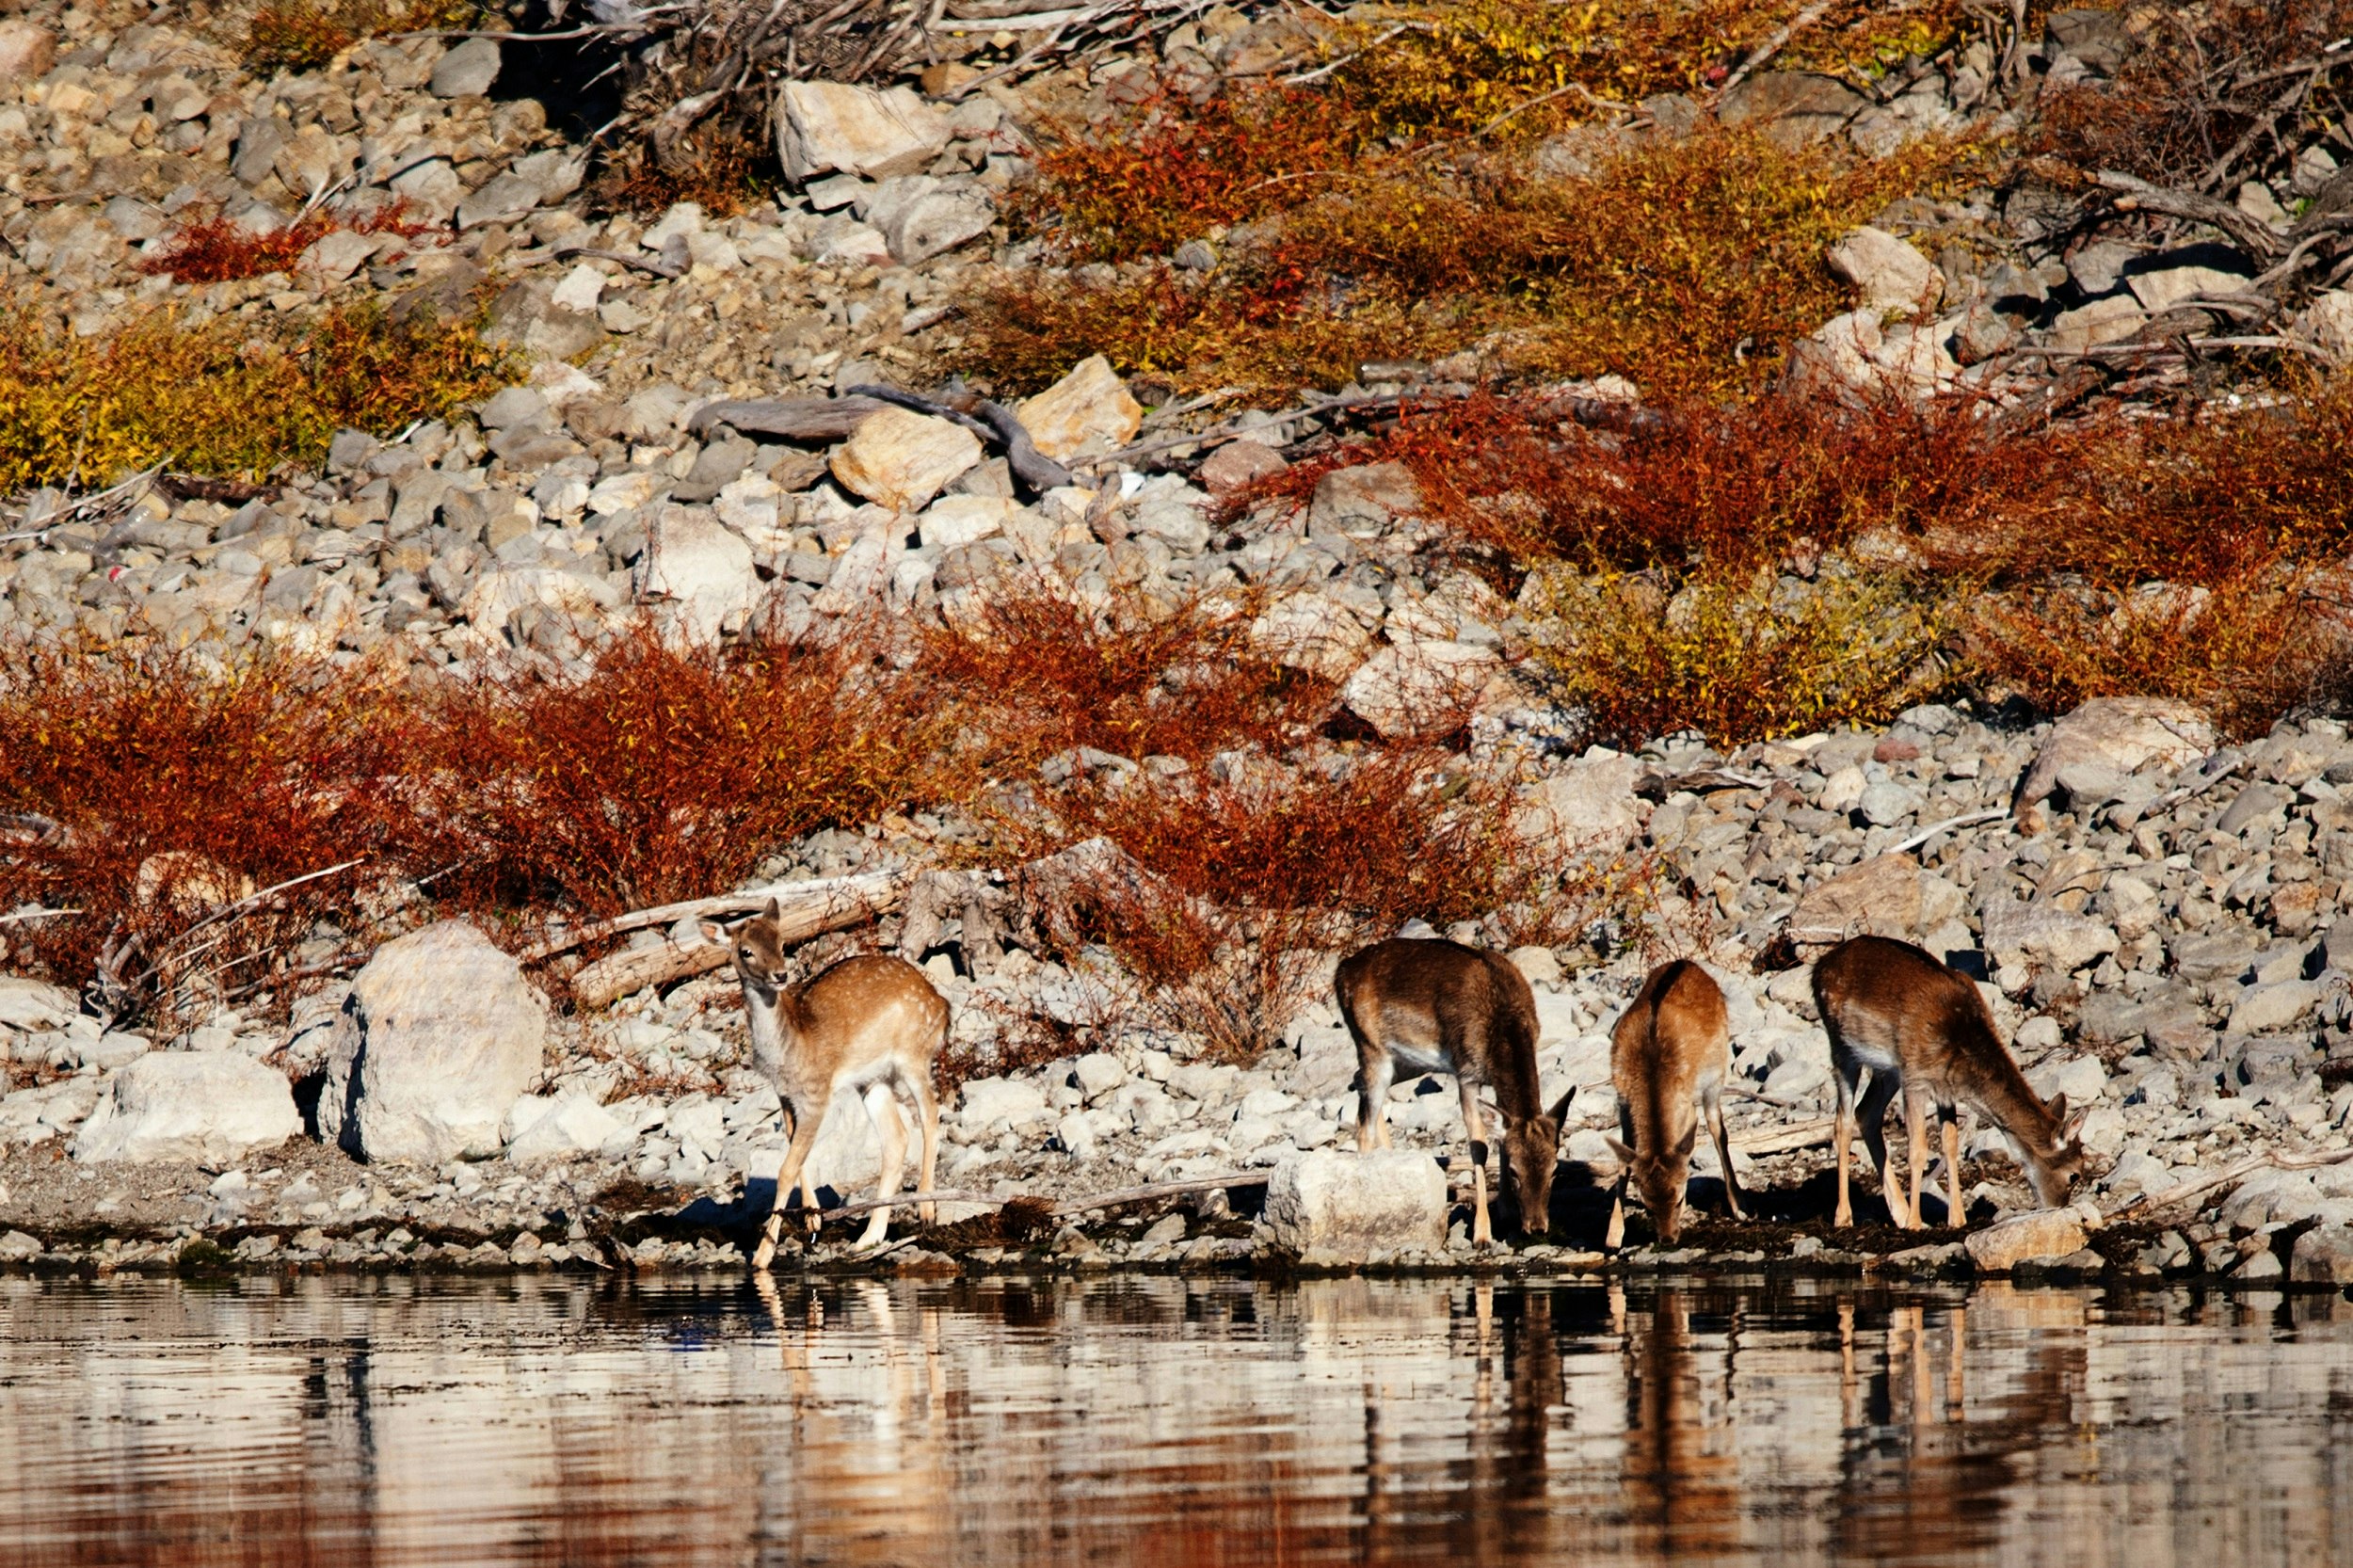 Four deer stand down by some water. They're well camouflaged by the red and brown foliage behind them.